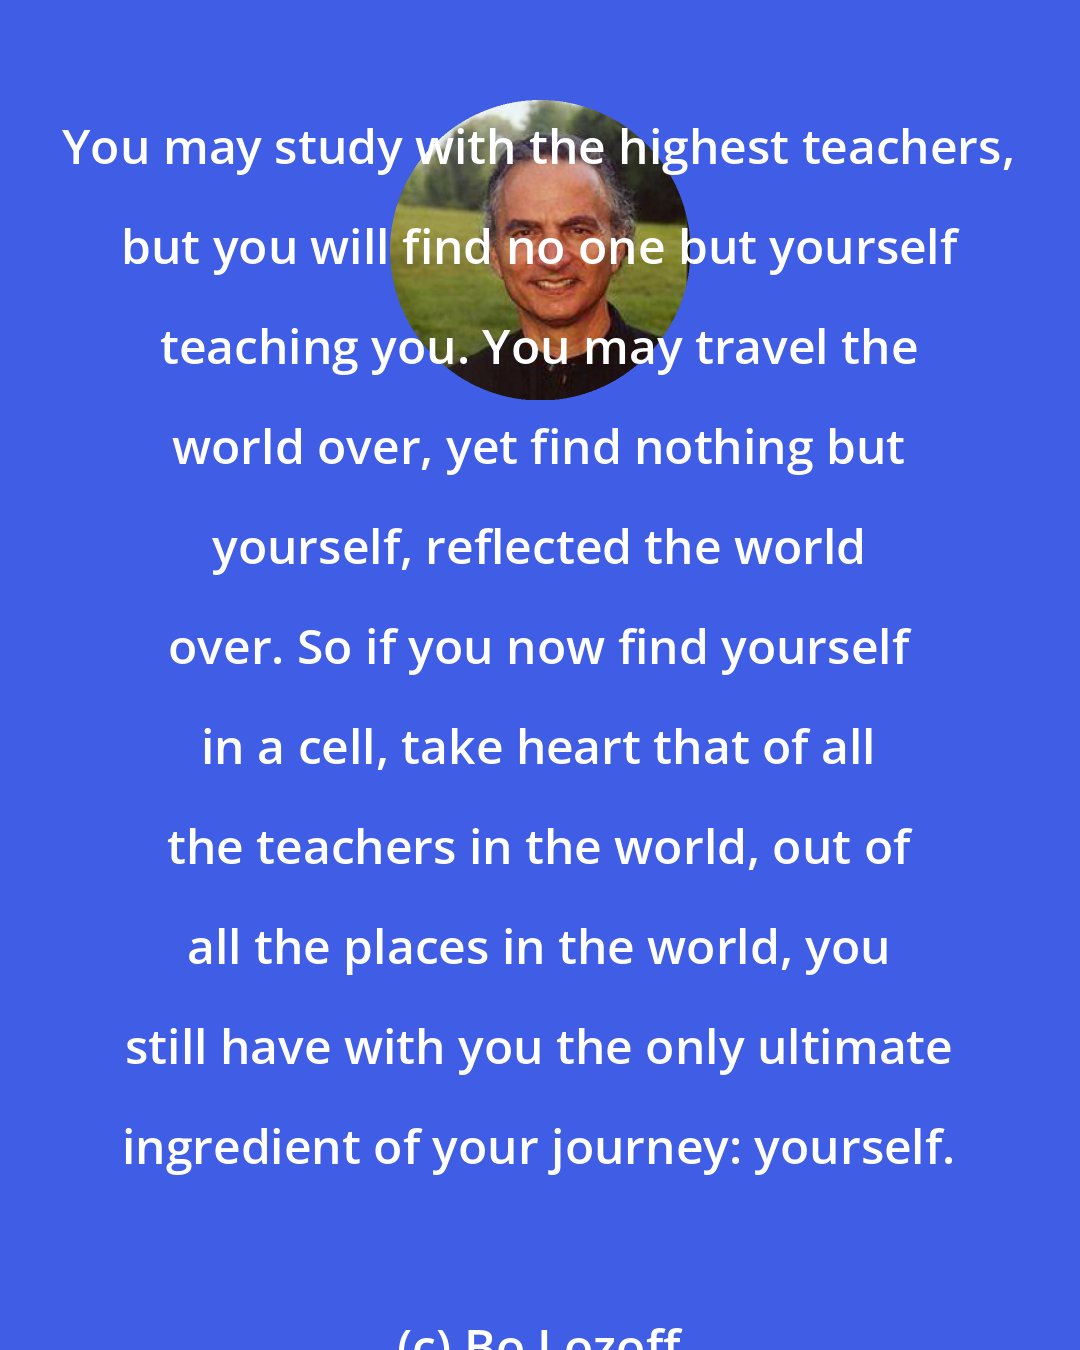 Bo Lozoff: You may study with the highest teachers, but you will find no one but yourself teaching you. You may travel the world over, yet find nothing but yourself, reflected the world over. So if you now find yourself in a cell, take heart that of all the teachers in the world, out of all the places in the world, you still have with you the only ultimate ingredient of your journey: yourself.